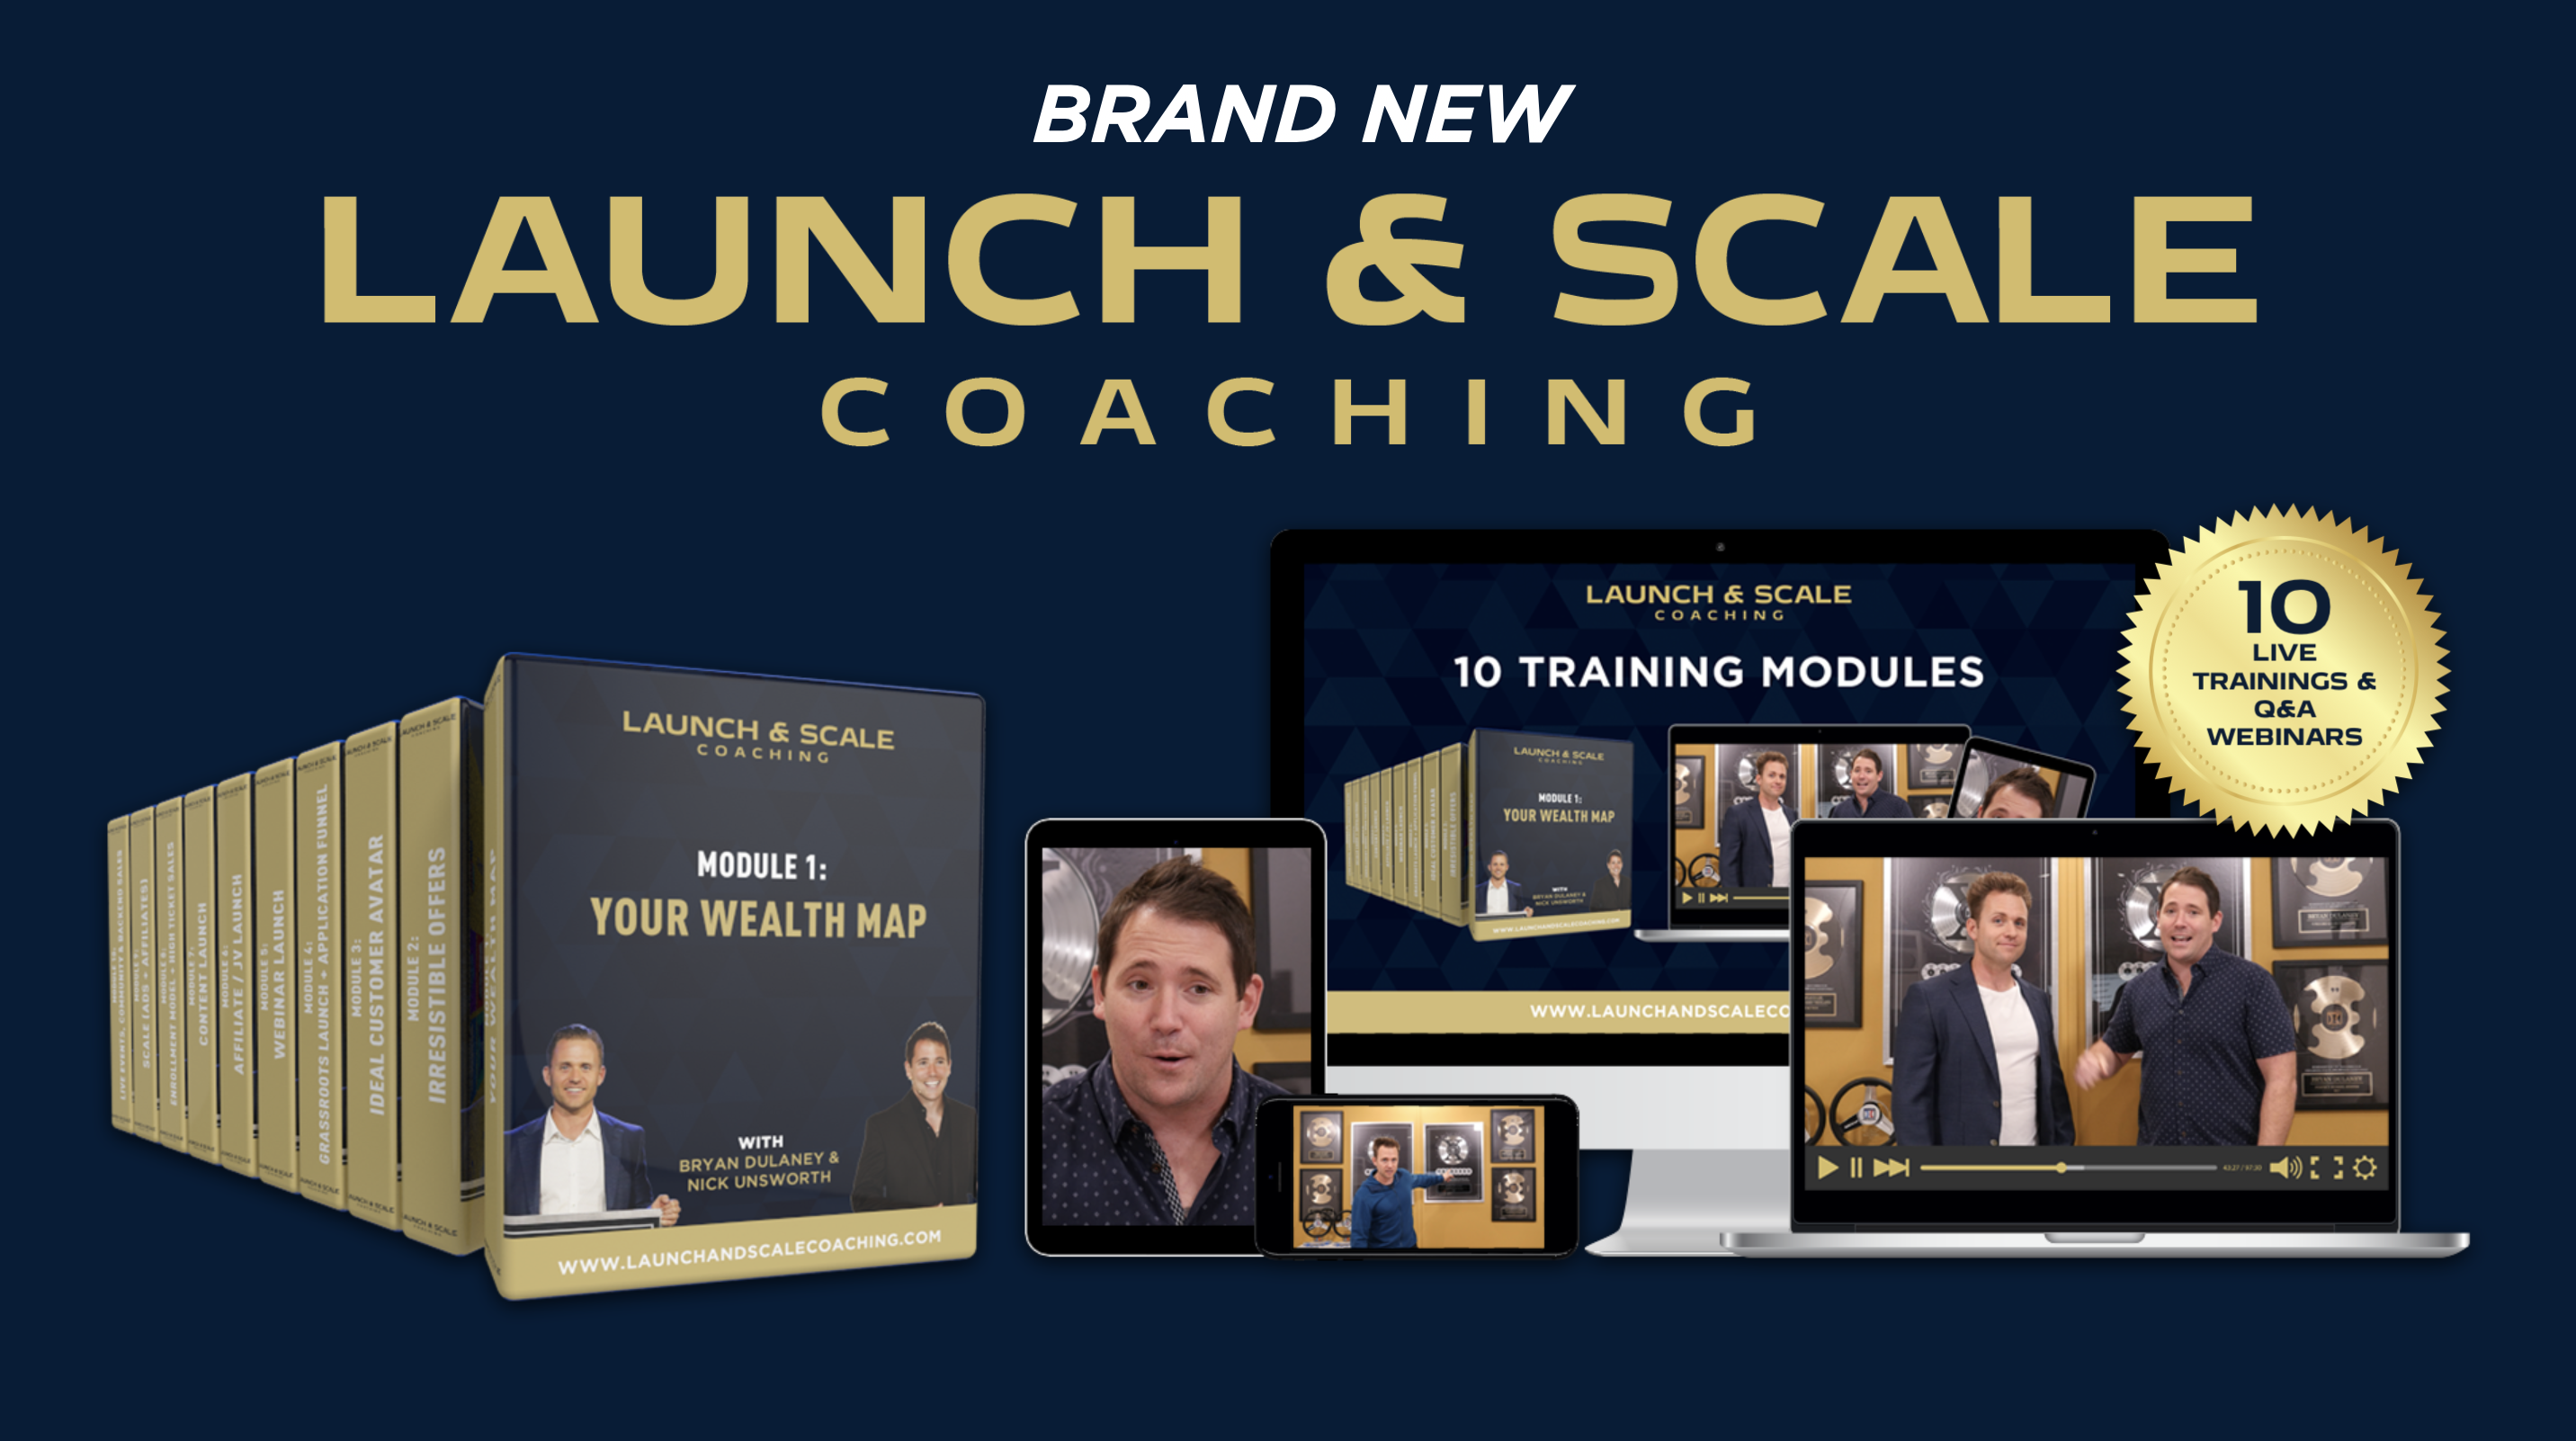 The Launch & Scale Coaching By Bryan Dulaney & Nick Unsworth